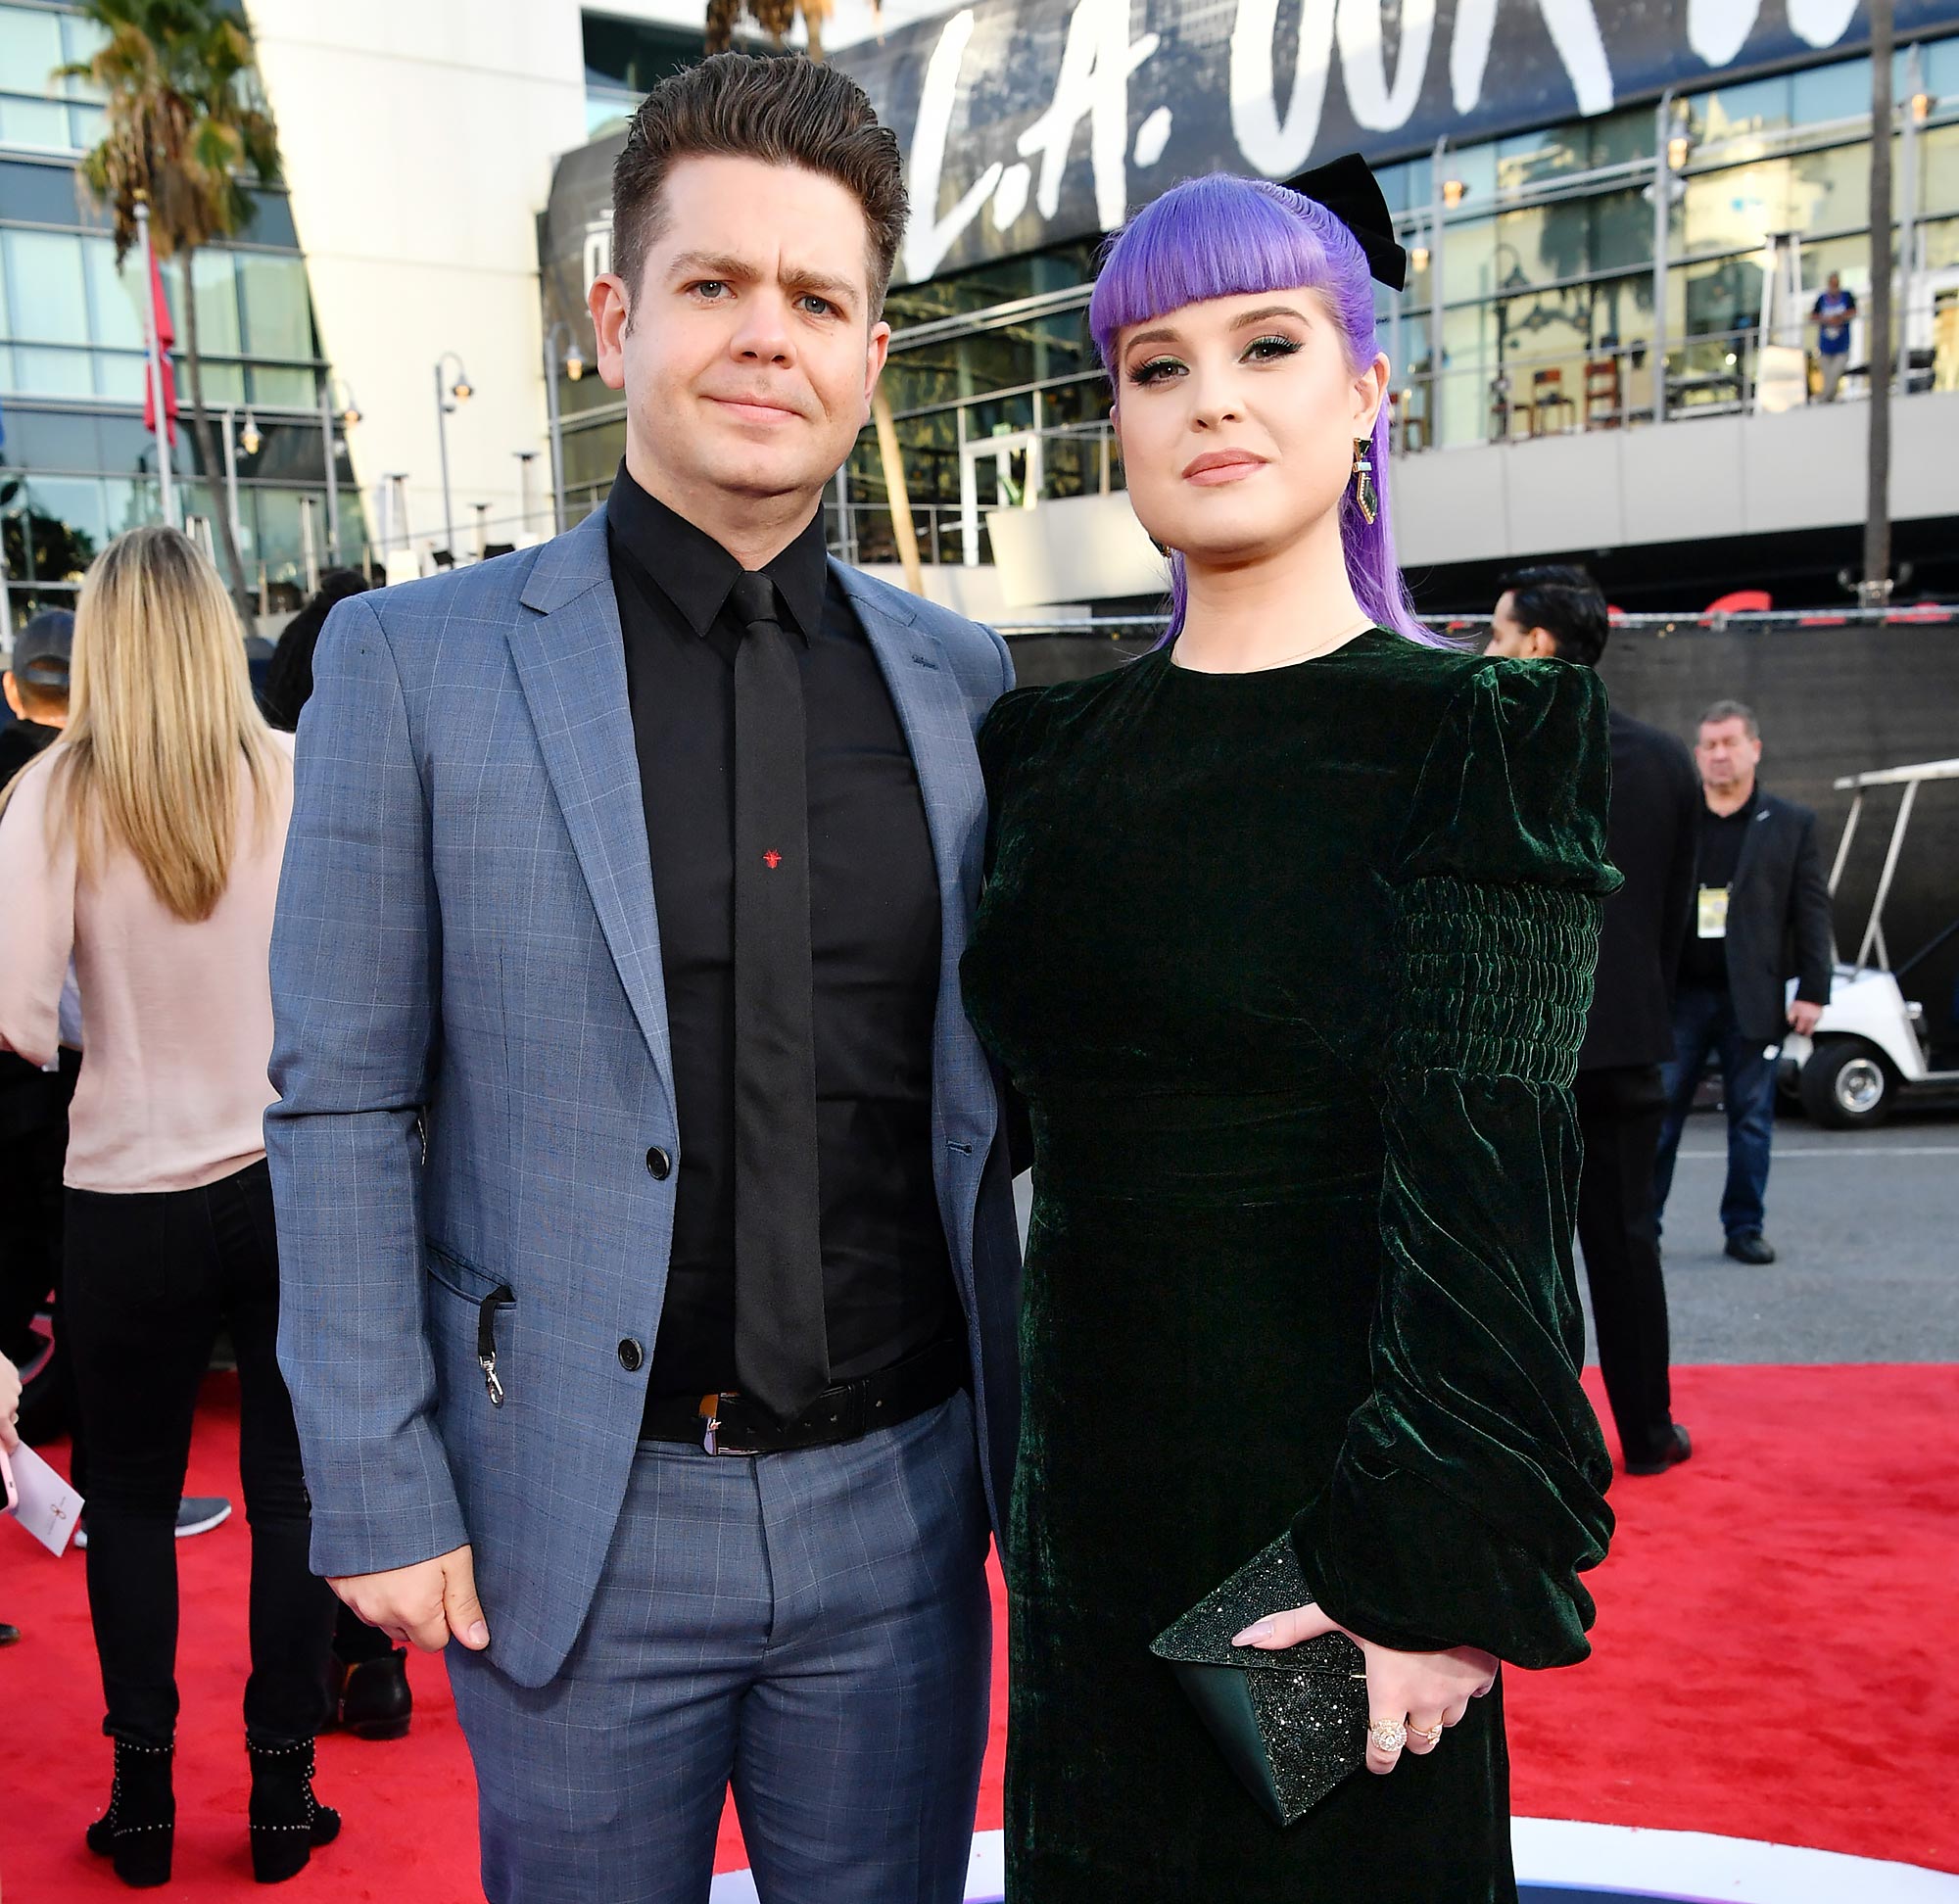 Kelly Osbourne Says She 'Almost Died' After Brother Jack Accidentally Shot Her With a Pellet Gun in the '90s